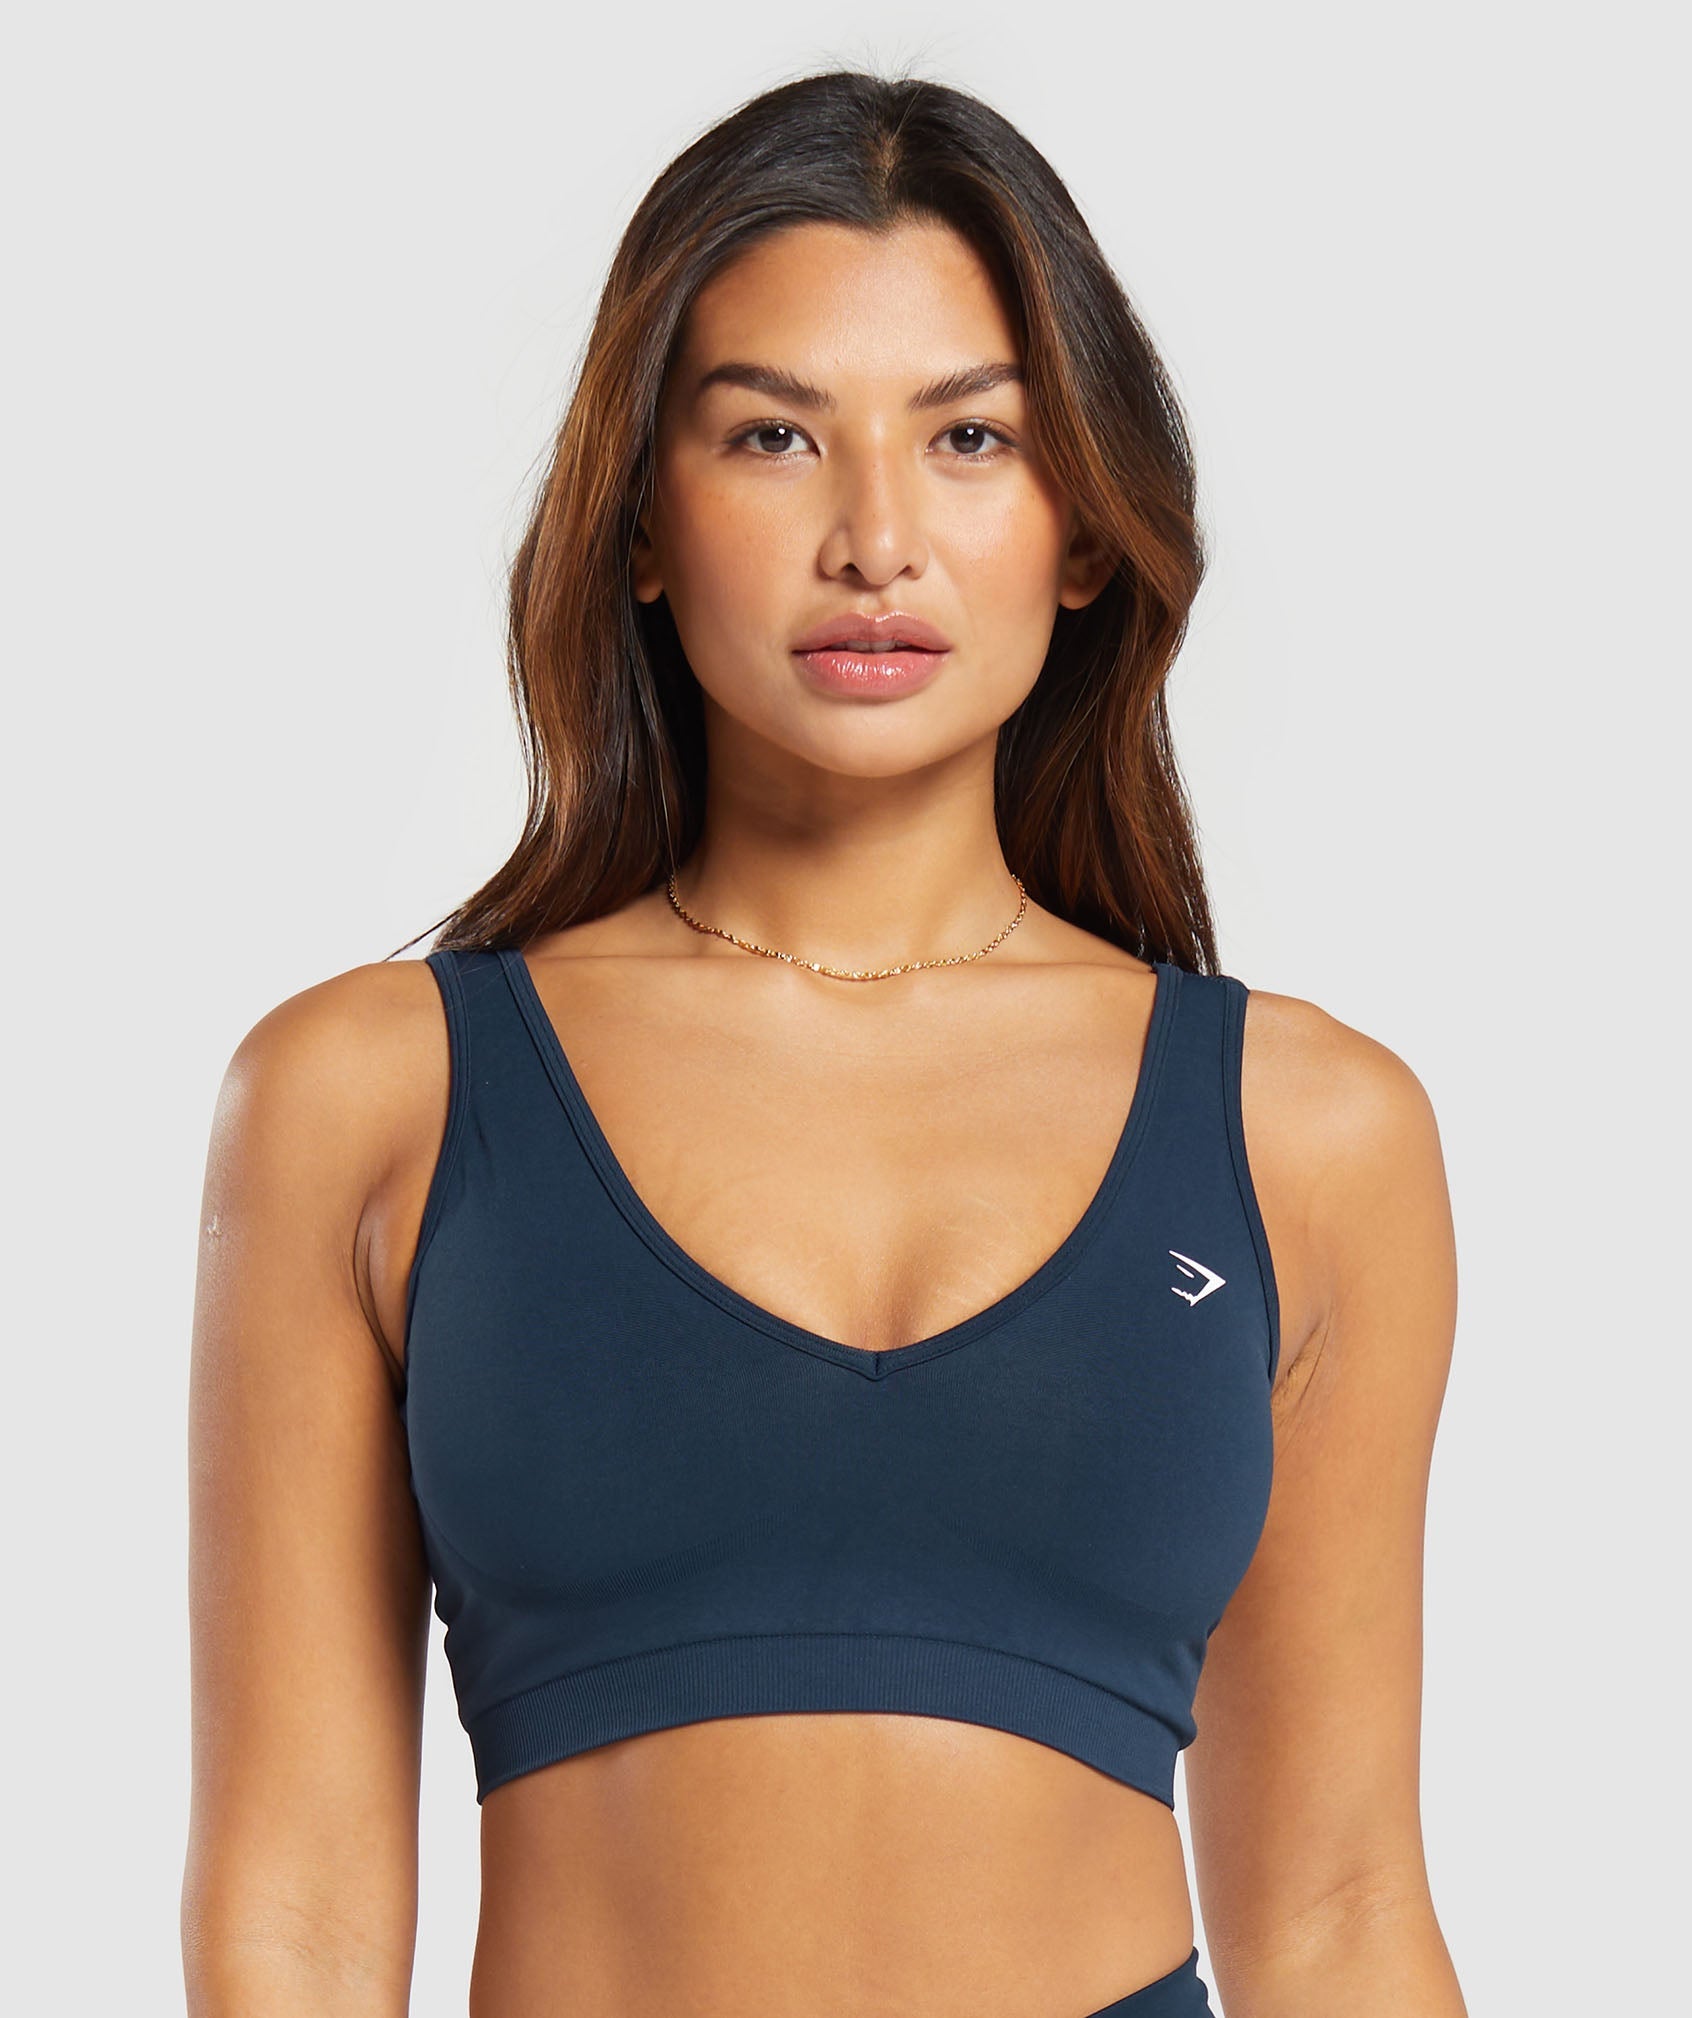 Gymshark Sports Bra  Free and Faster Shipping on AliExpress